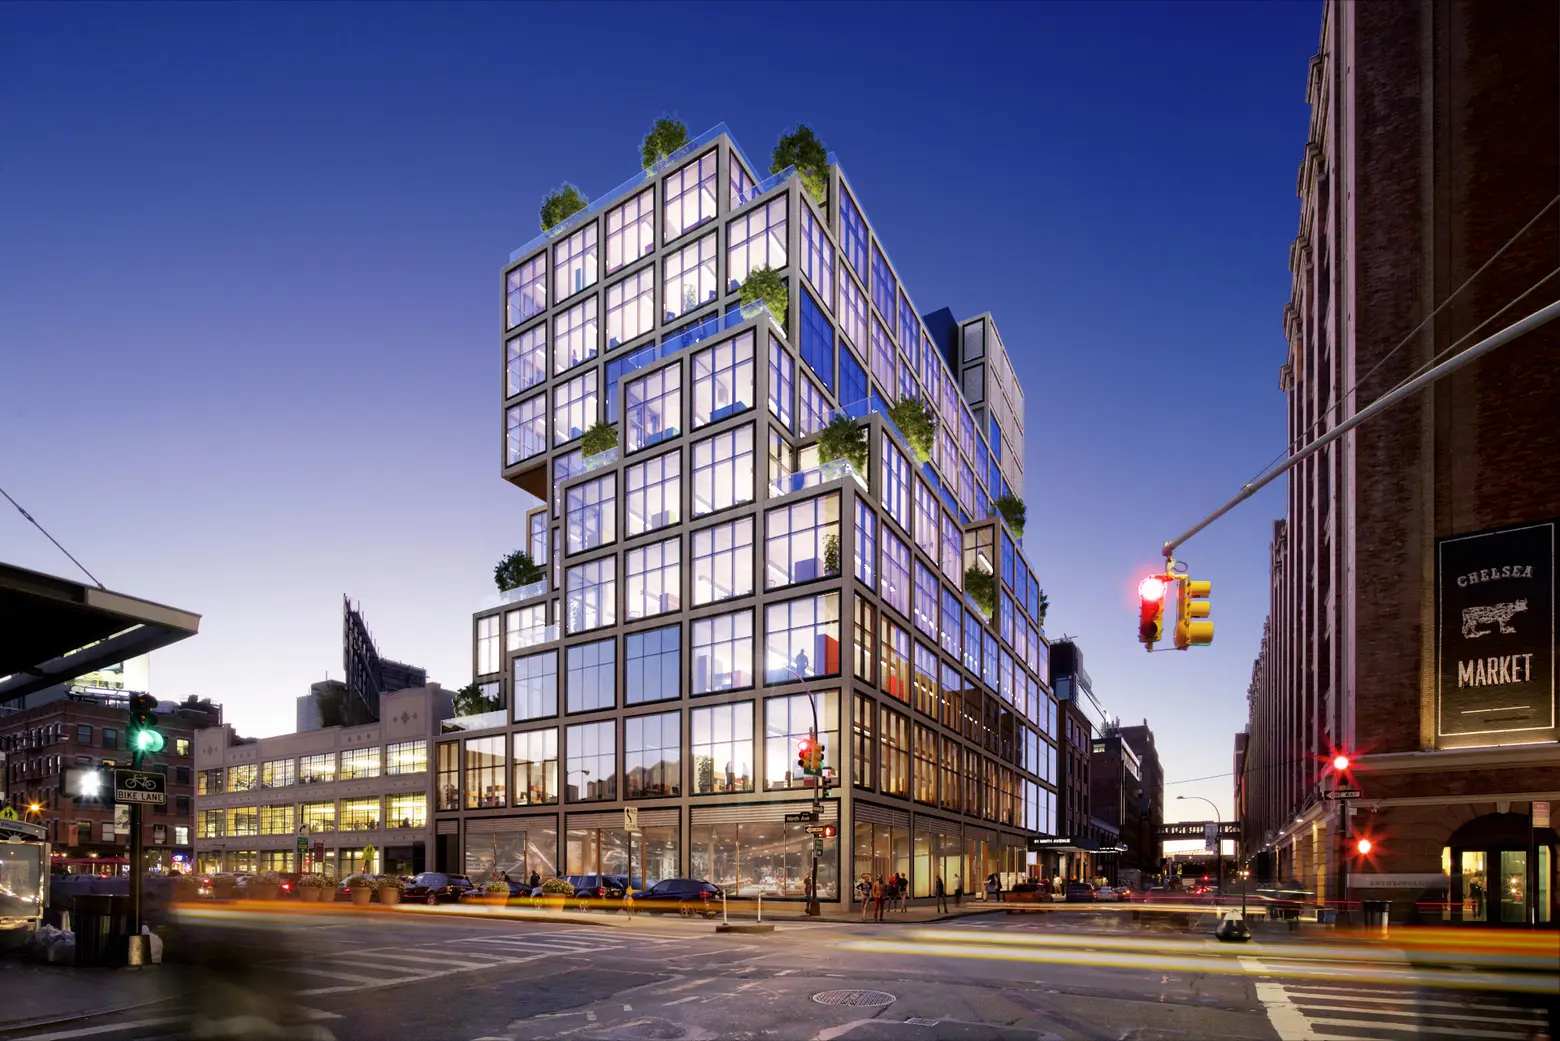 Rafael Viñoly’s Meatpacking Building to Include World’s Largest Starbucks, See New Renderings